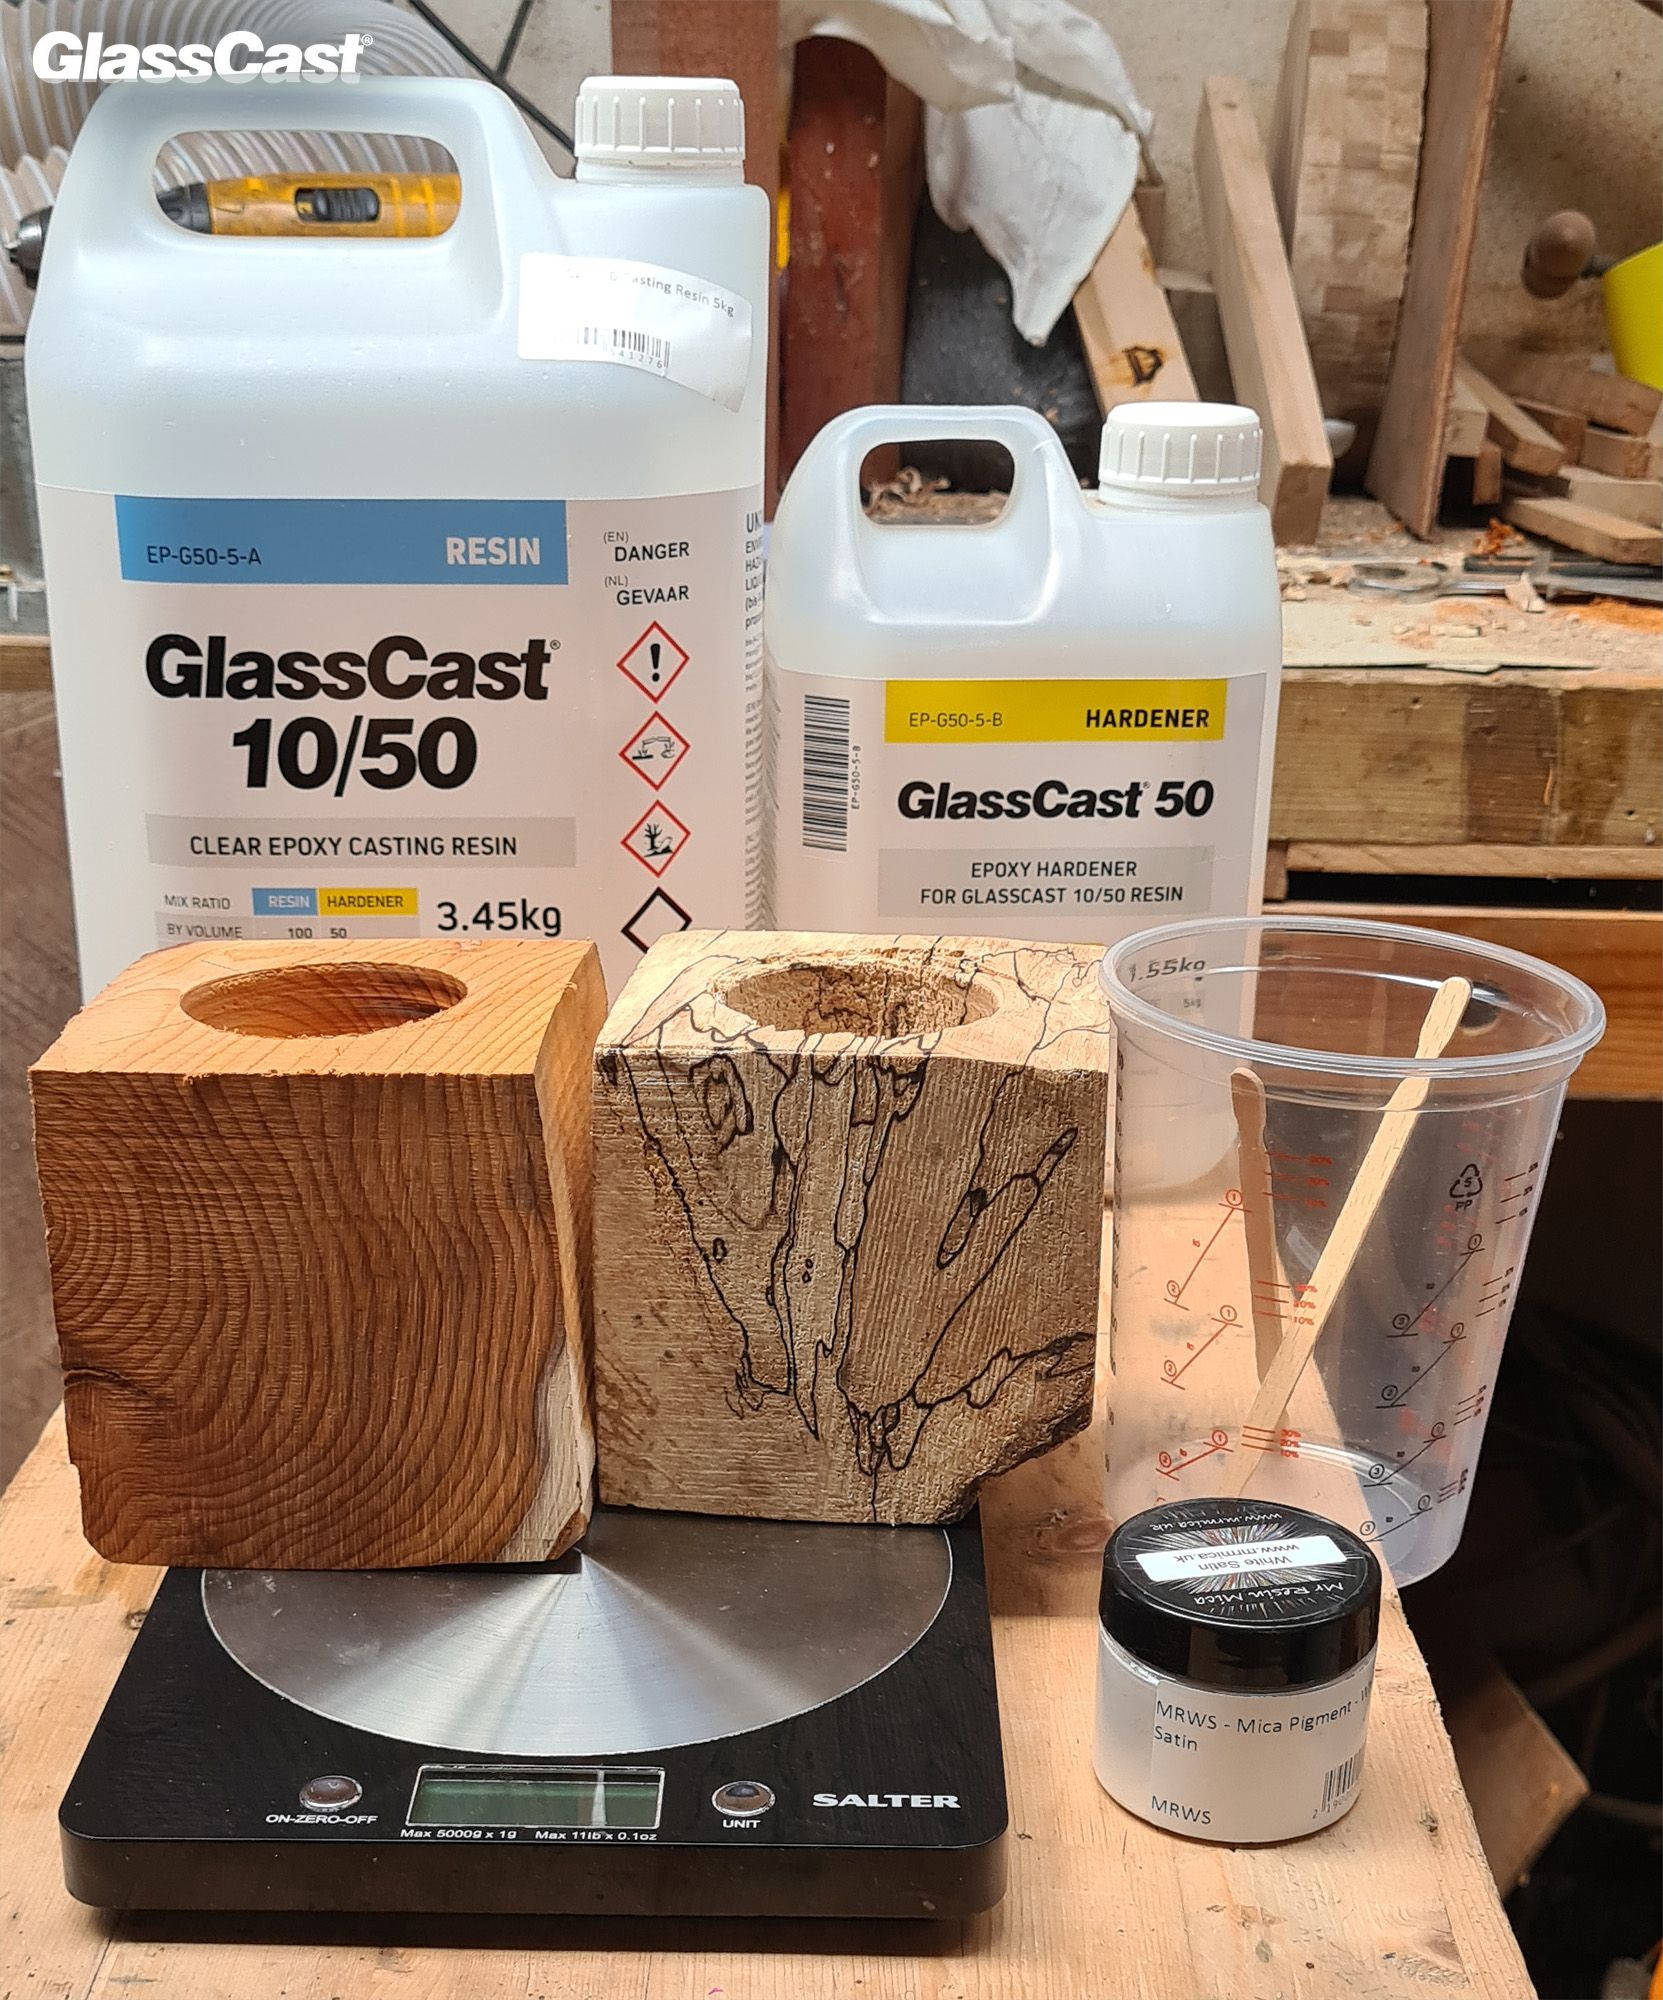 Using GlassCast 50 Epoxy Resin for Casting Blanks for Wood Turning